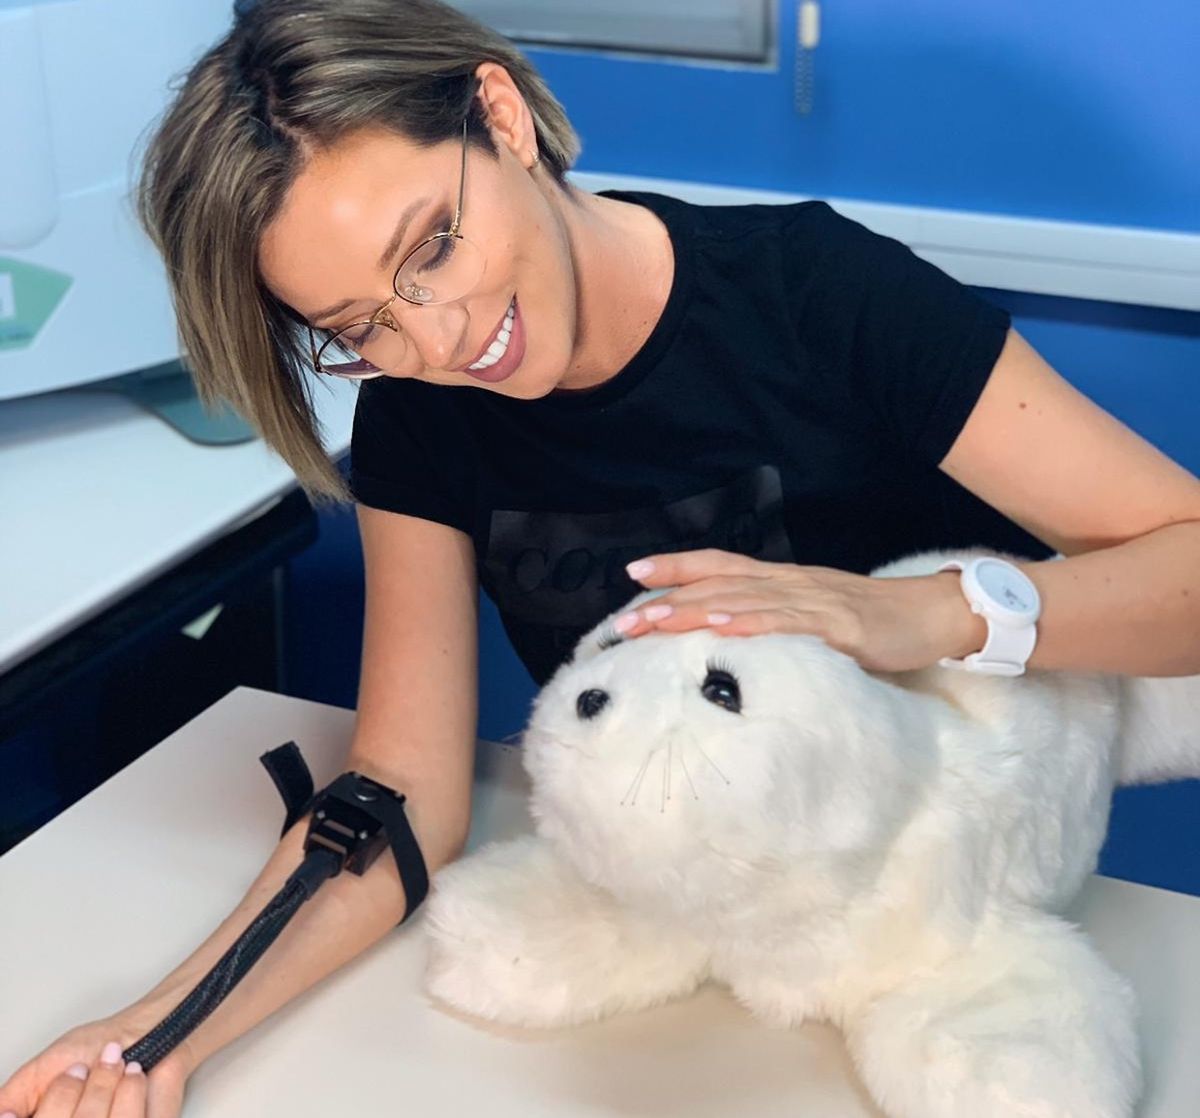 Study shows that interacting with a robotic seal can reduce the perception of pain